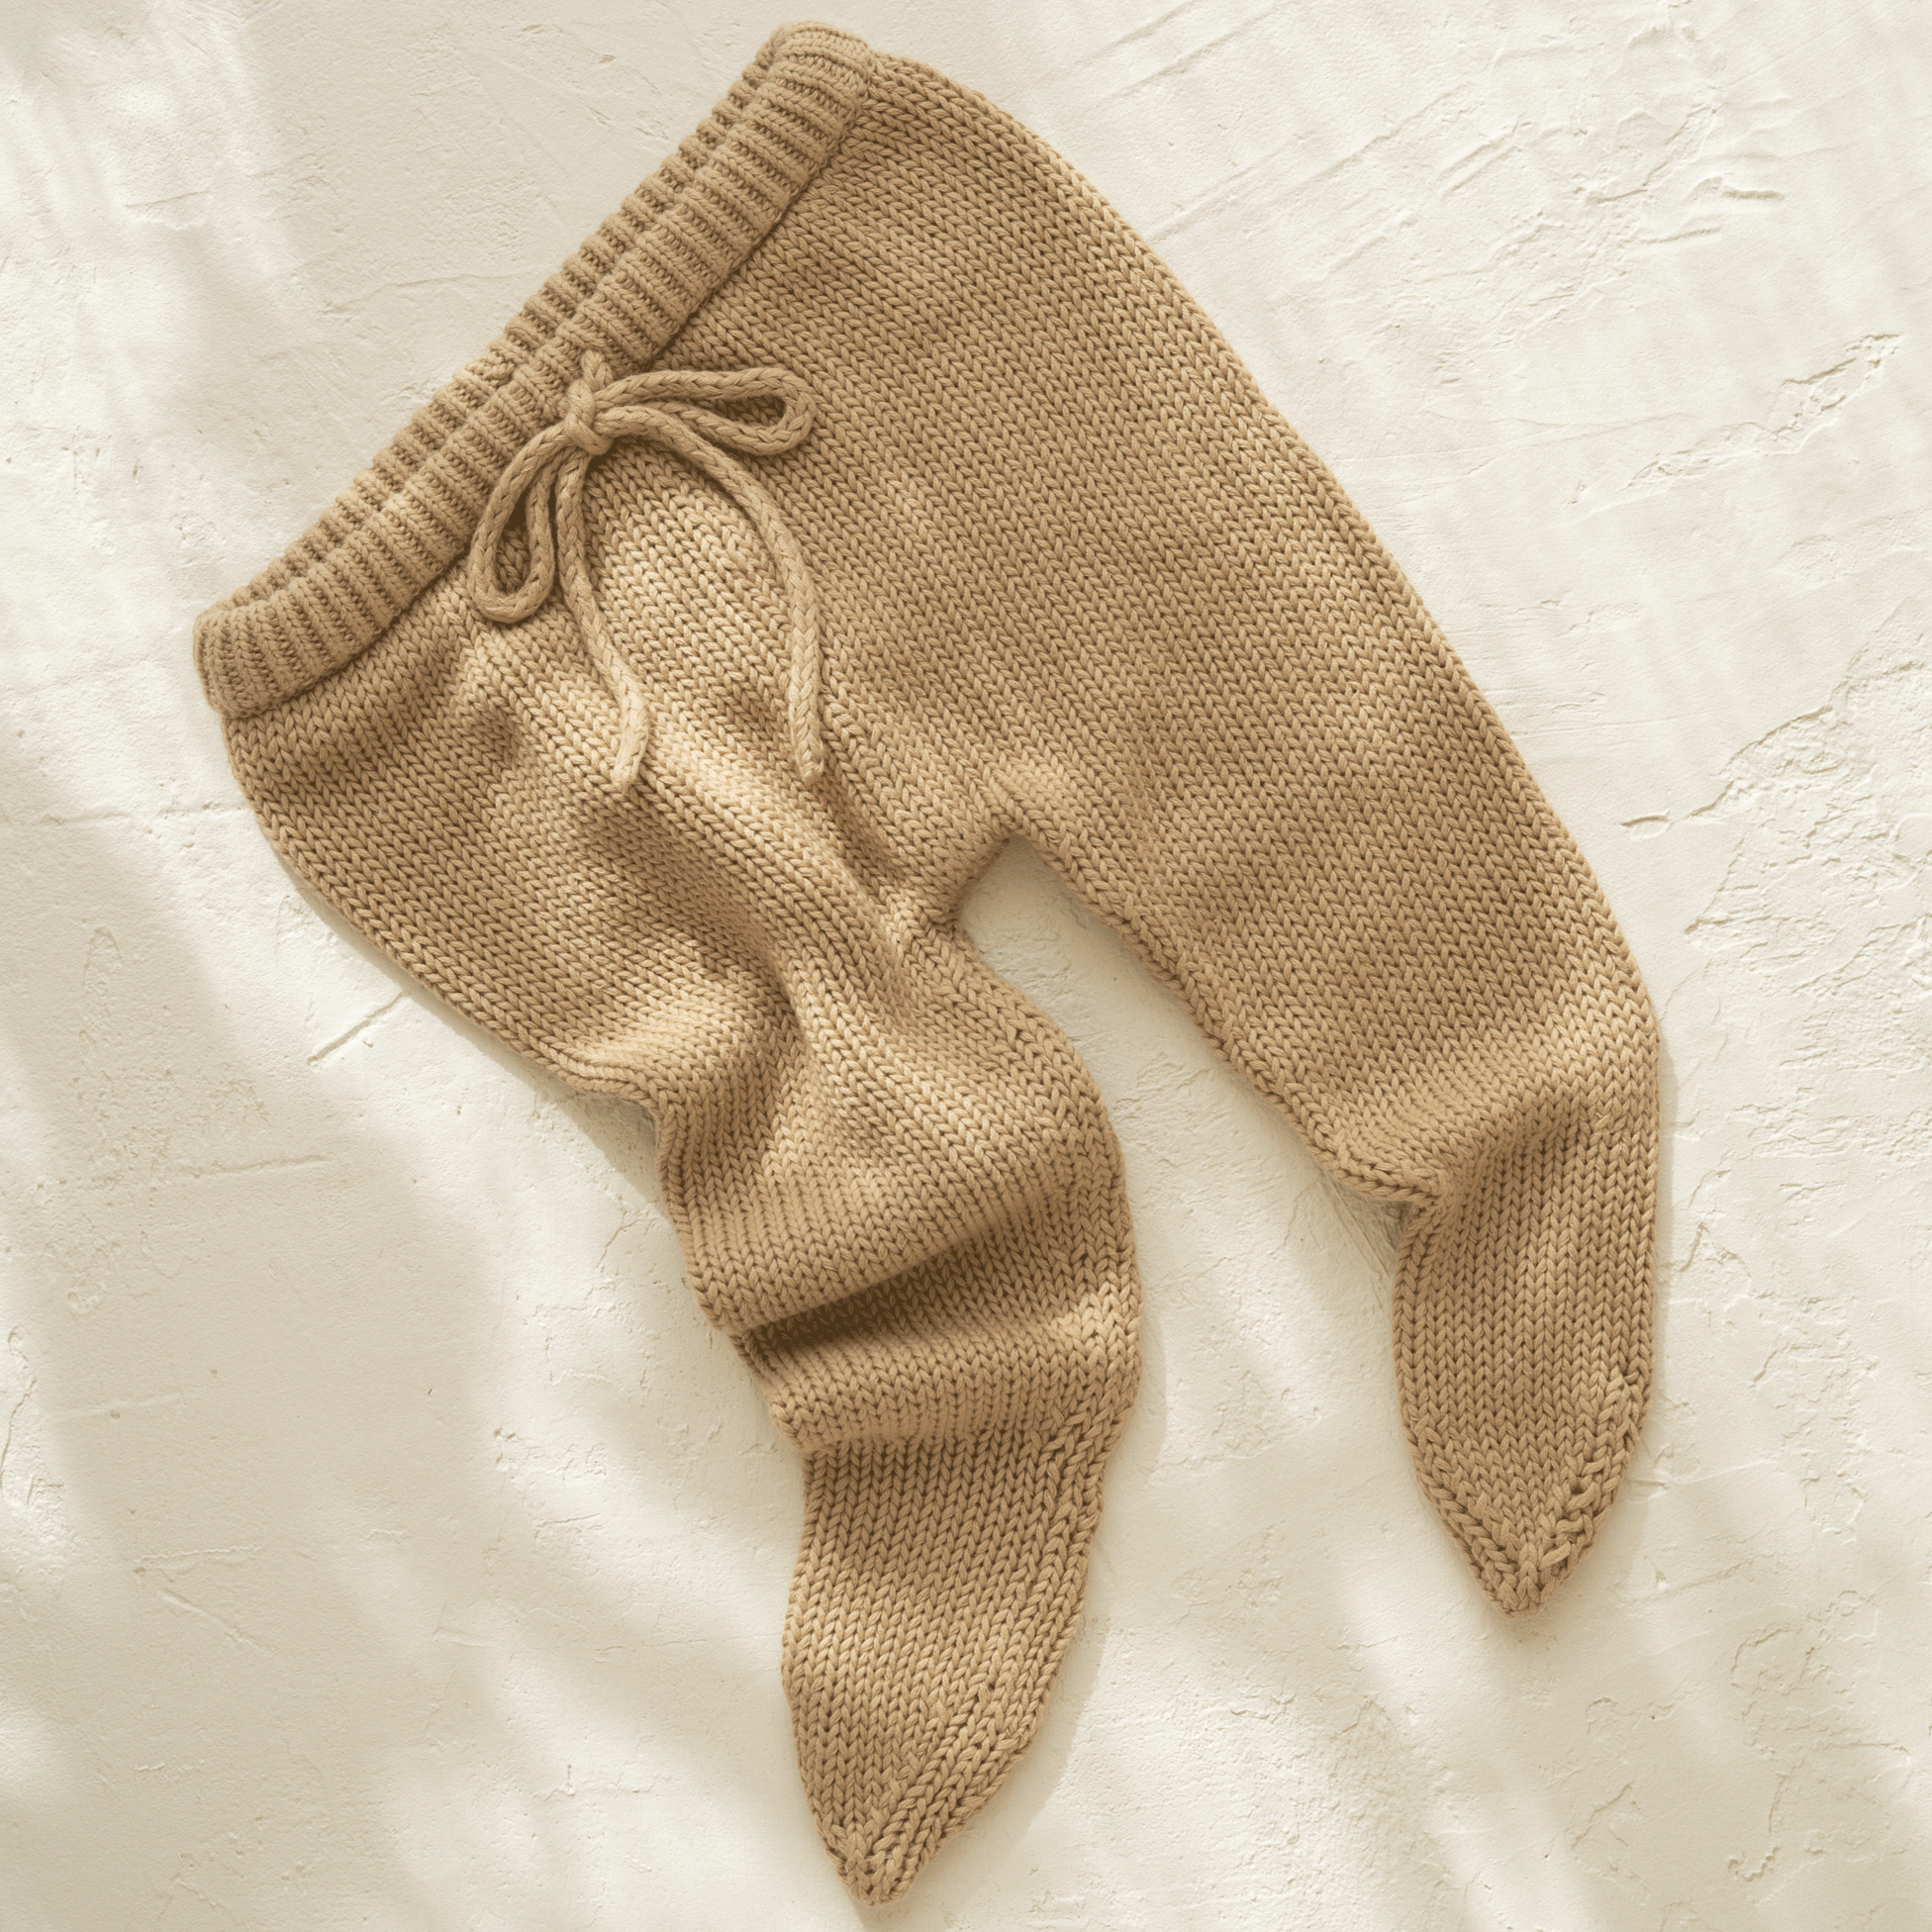 A pair of Illoura the Label's illoura poet pants in olive, made of beige organic cotton, laying on a white surface.